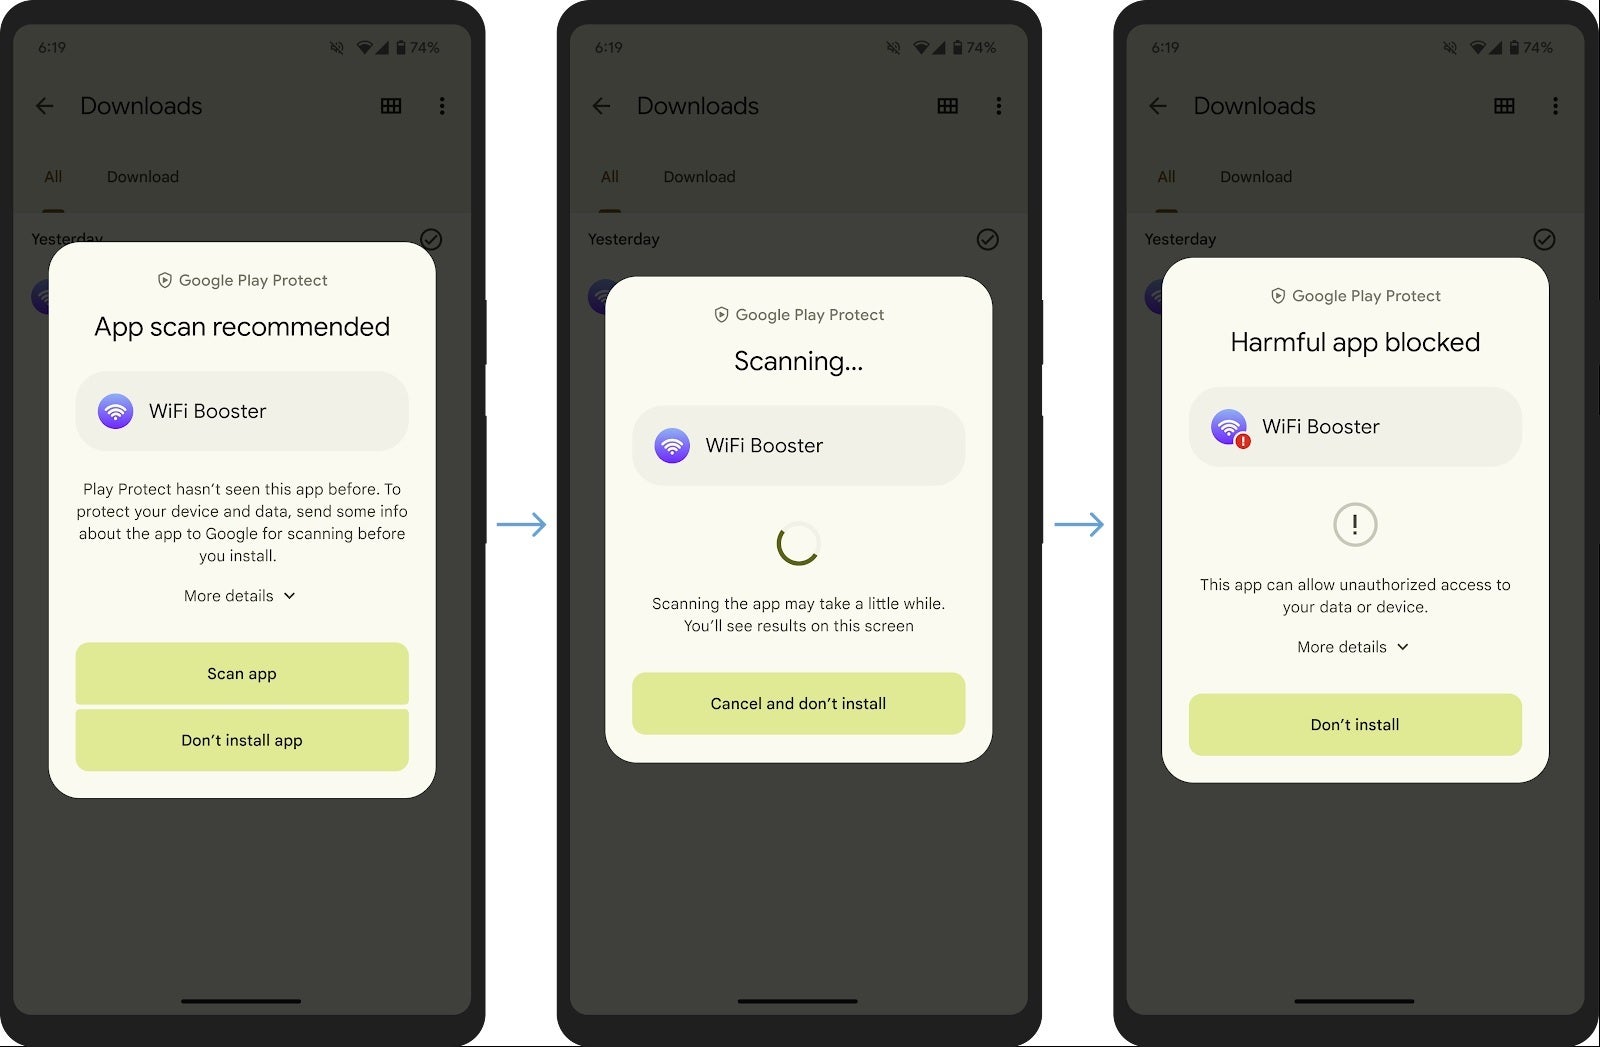 Google Play Protect will do a code-level real-time app scan to help catch dangerous apps disguised to escape detection - Google Play Protect can now find malicious Android apps that try to evade detection